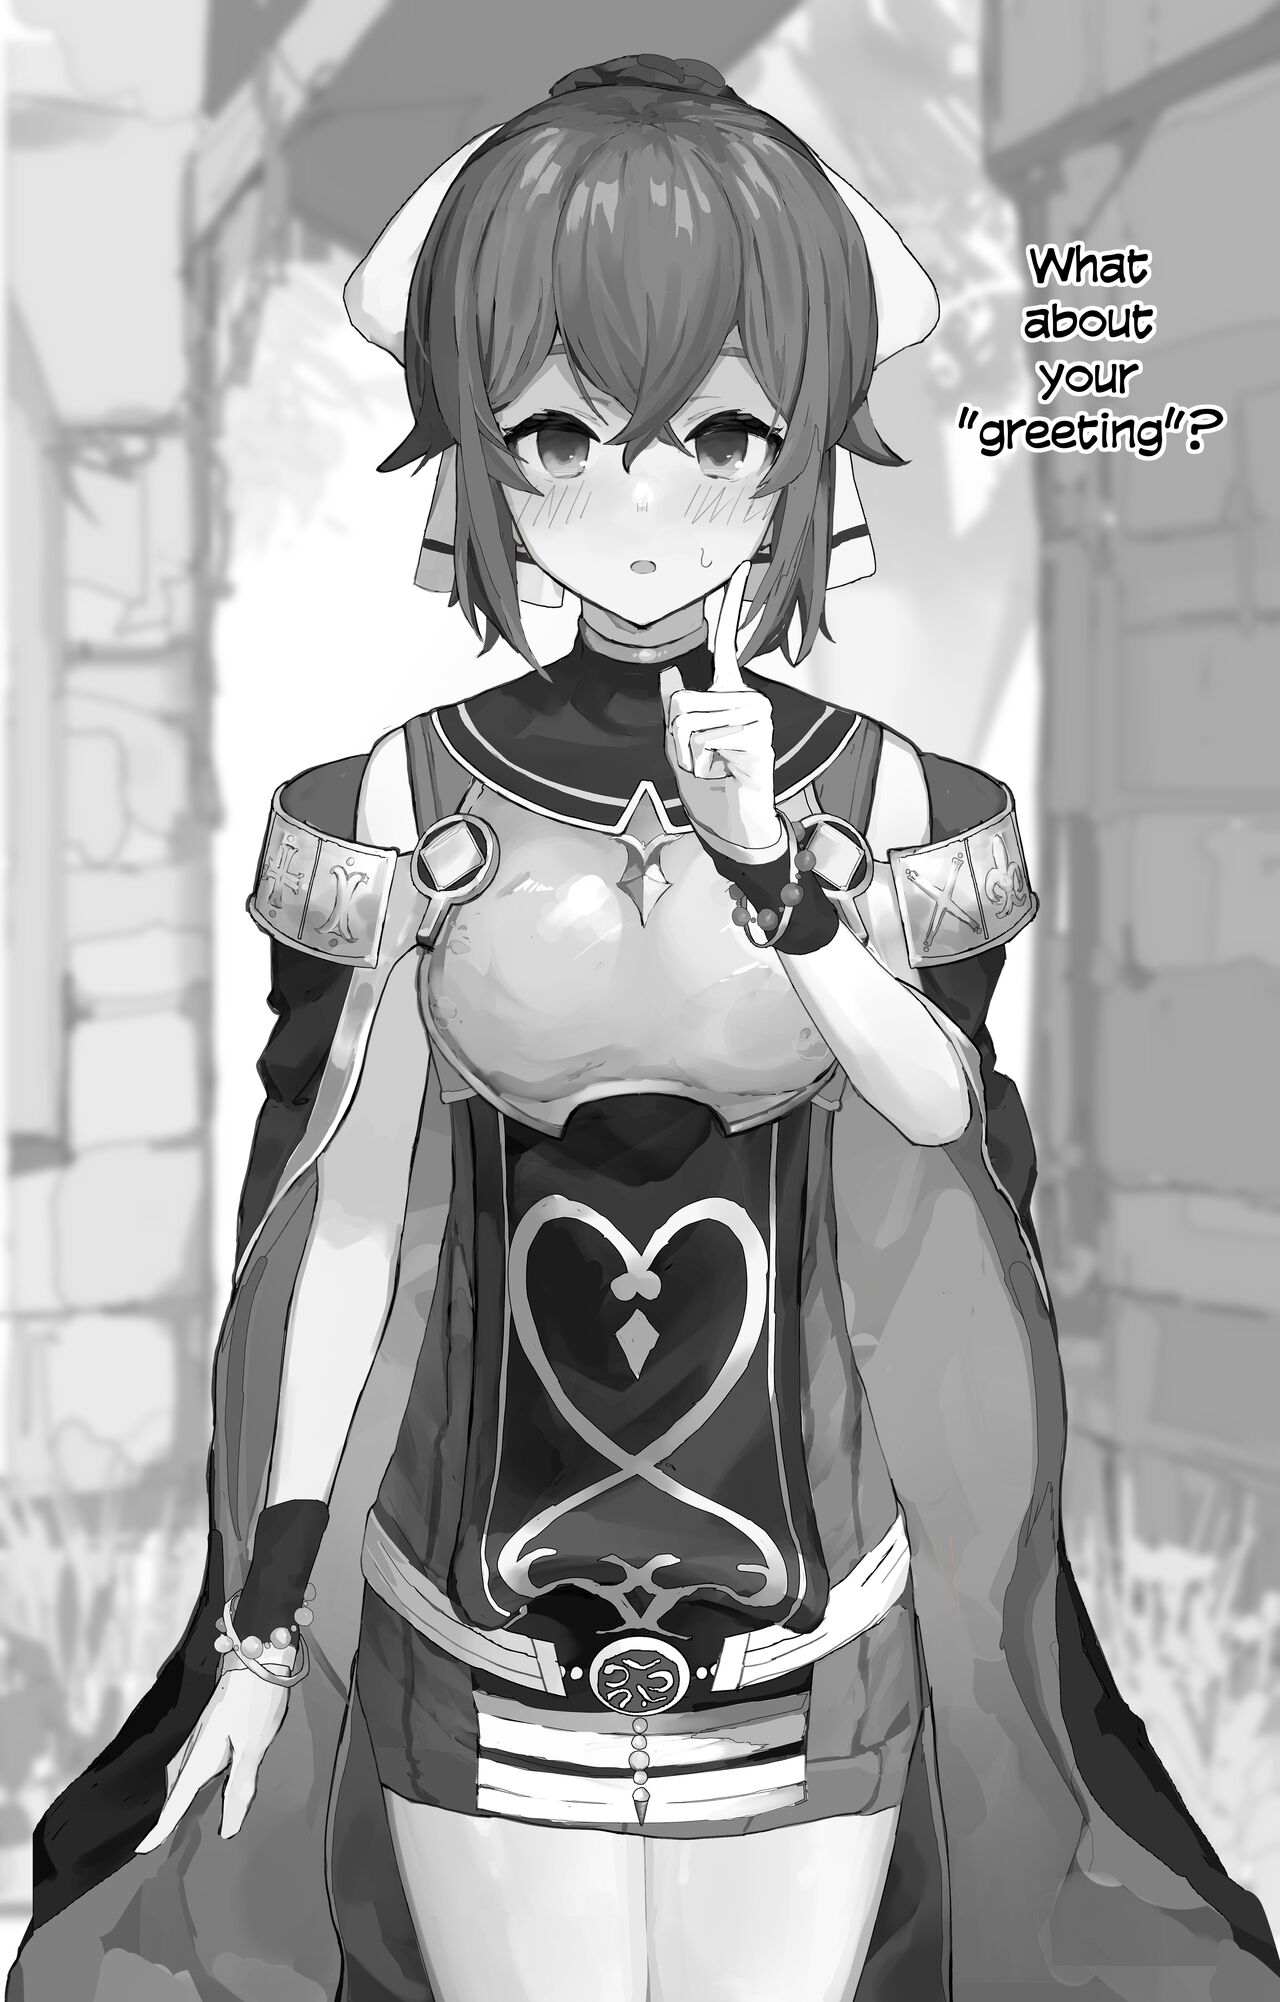 Xxx Black Toon Fire - Fire Emblem Echoes Delthea Brainwashing Situation - Page 3 - IMHentai